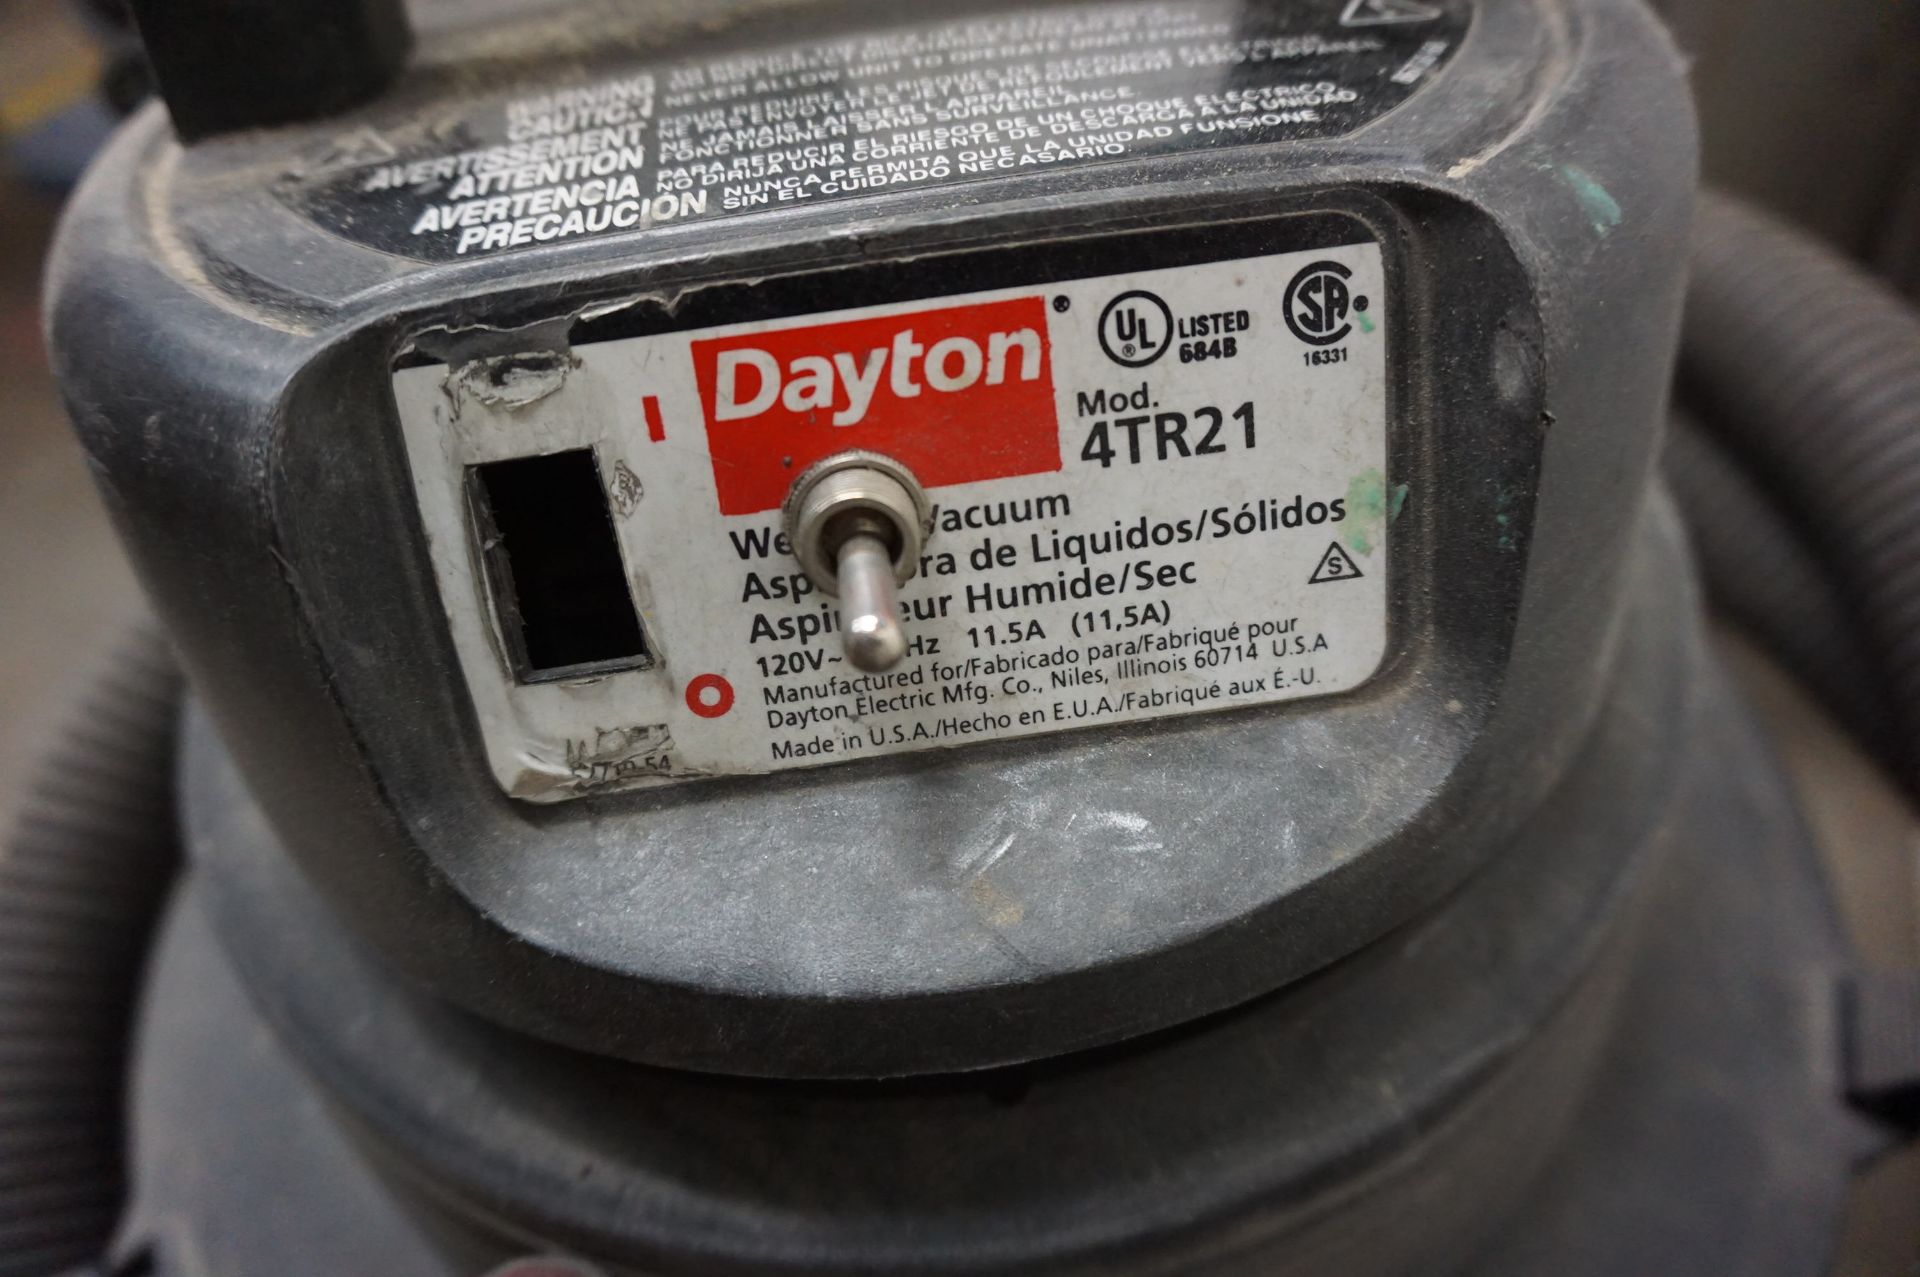 LOT TO INCLUDE: (1) BALDOR 662 GRINDER AND BUFFER, S/N W 697, (1) DAYTON MODEL 4TR21 SHOP VAC ** - Image 4 of 4